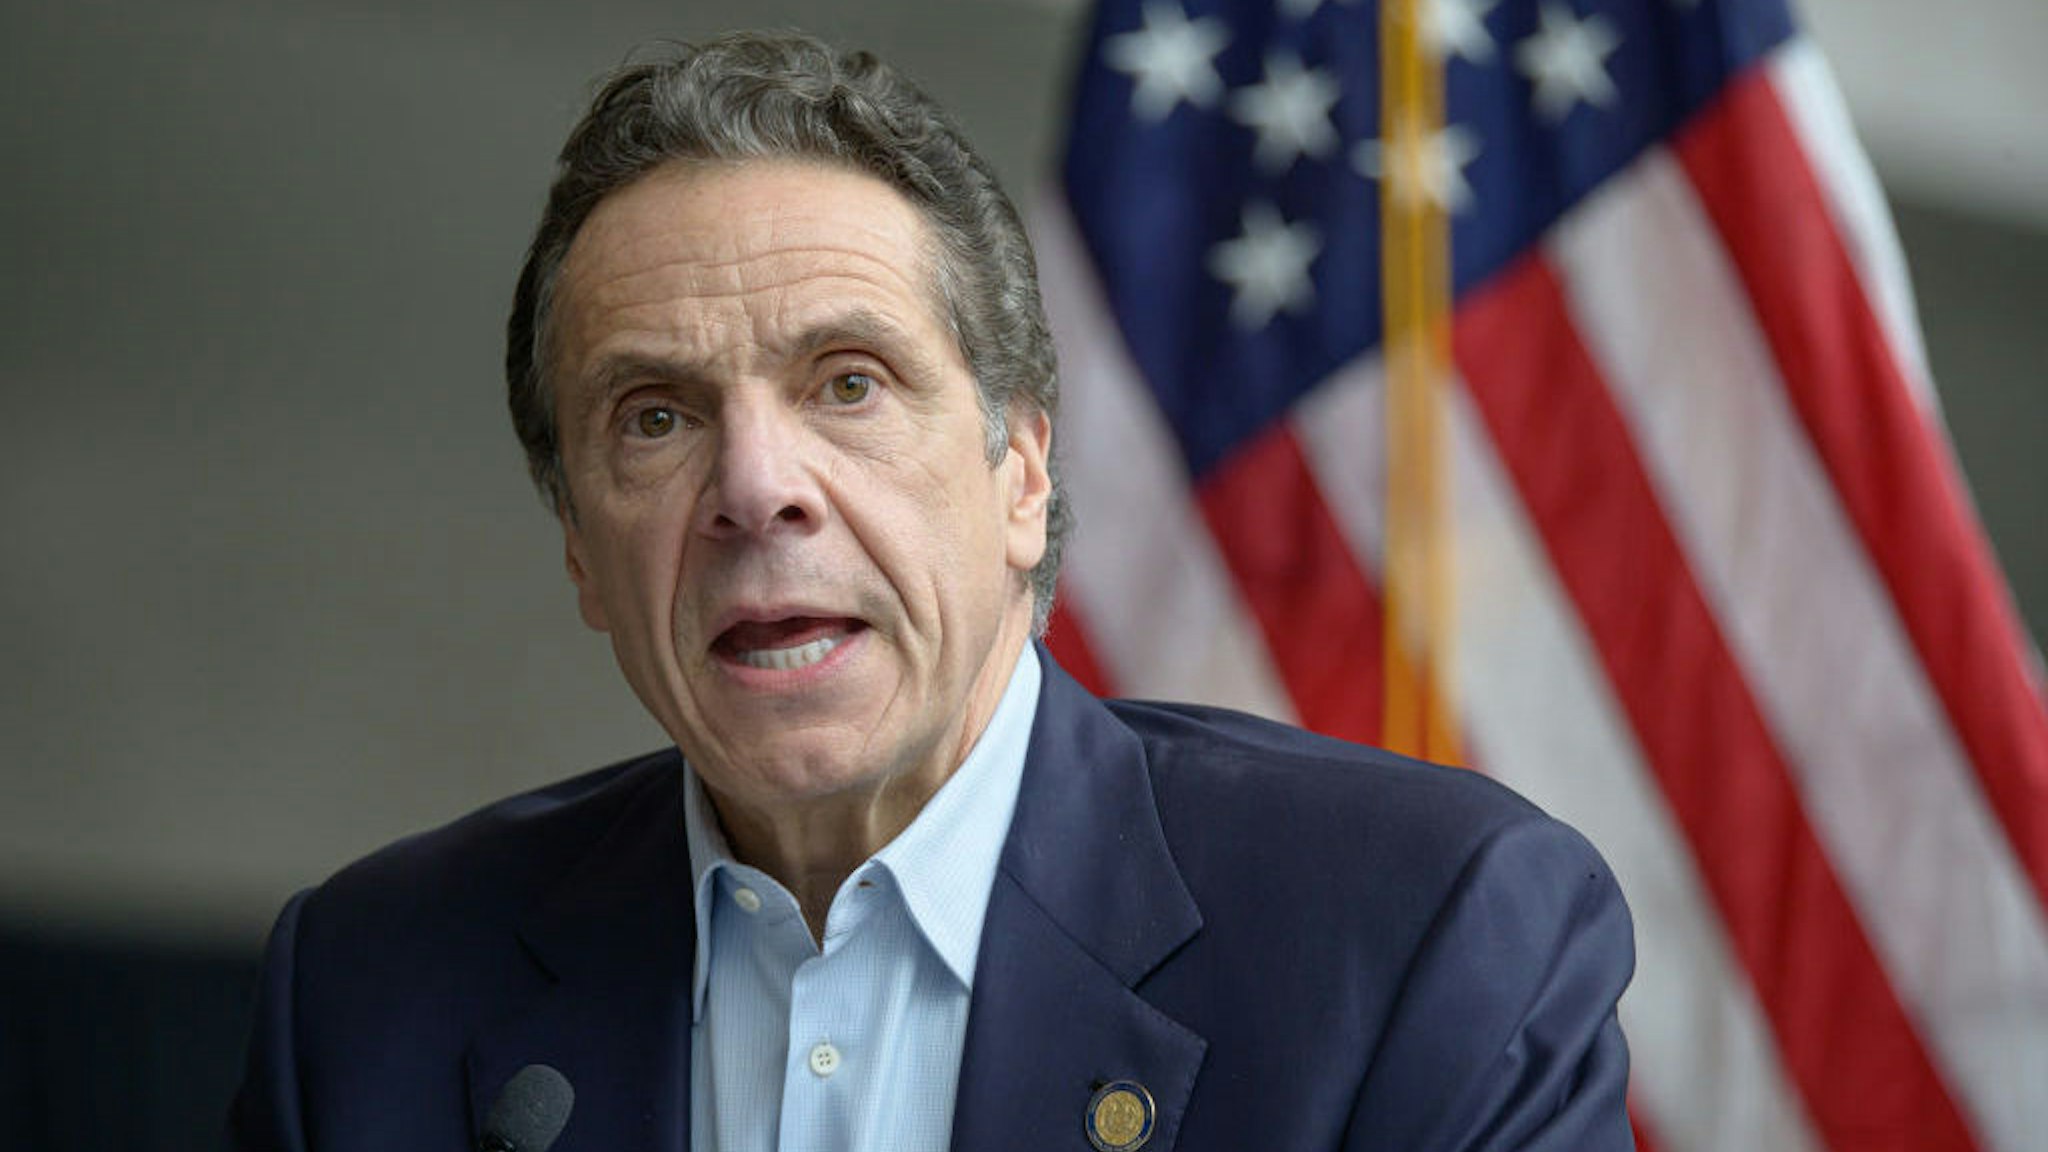 Following the arrival in New York City of the U.S. Naval hospital ship Comfort, NY State Governor Andrew Cuomo is seen during a press conference at the field hospital site at the Javits Center. (Photo by Albin Lohr-Jones/Pacific Press/LightRocket via Getty Images)